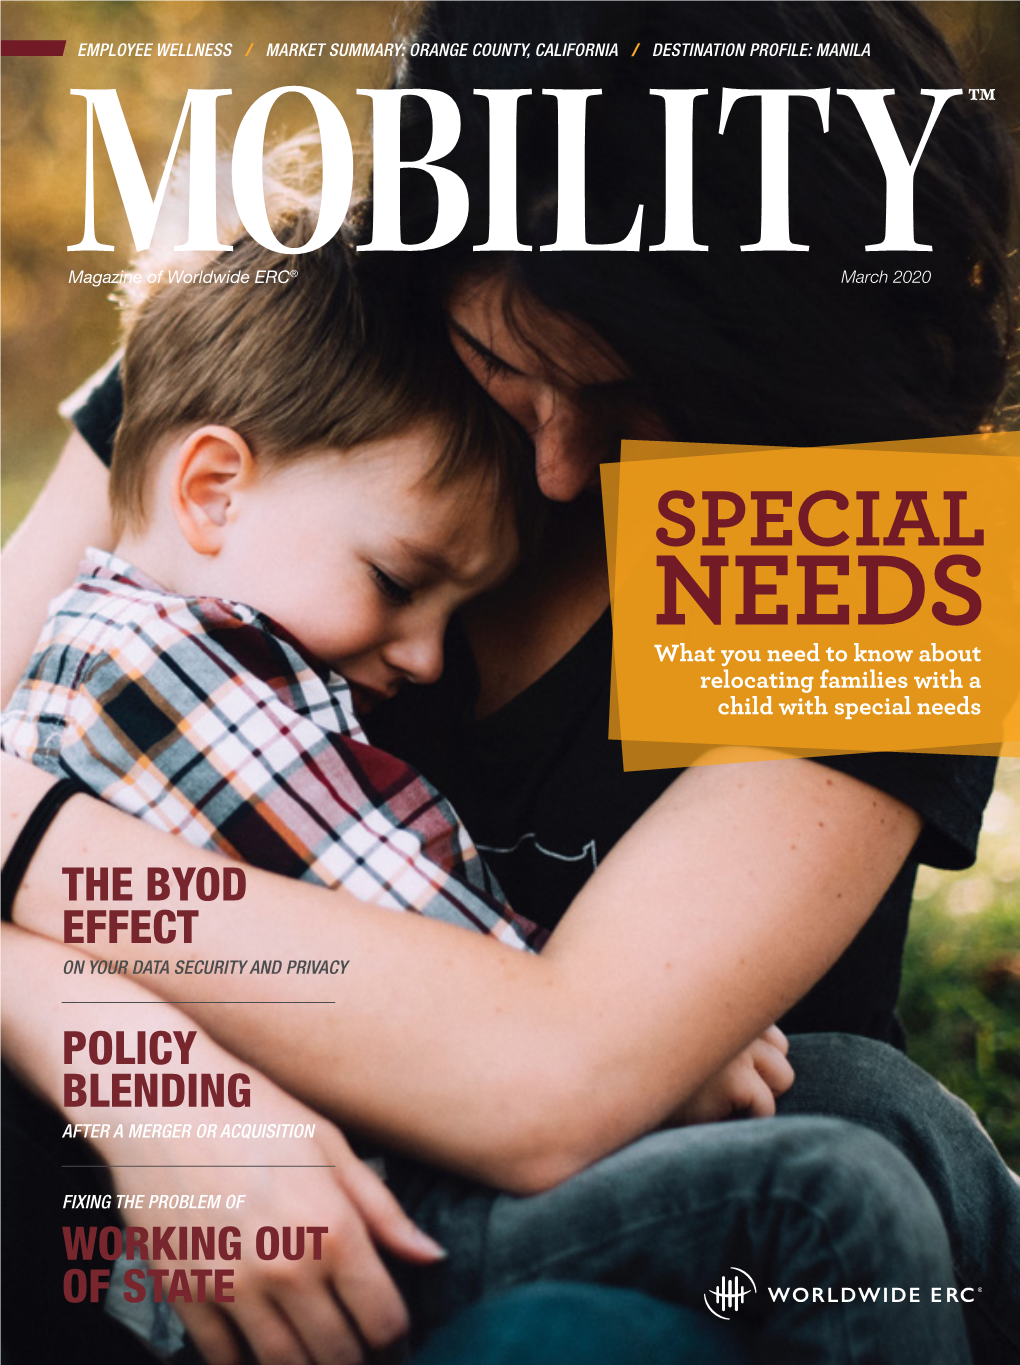 SPECIAL NEEDS What You Need to Know About Relocating Families with a Child with Special Needs